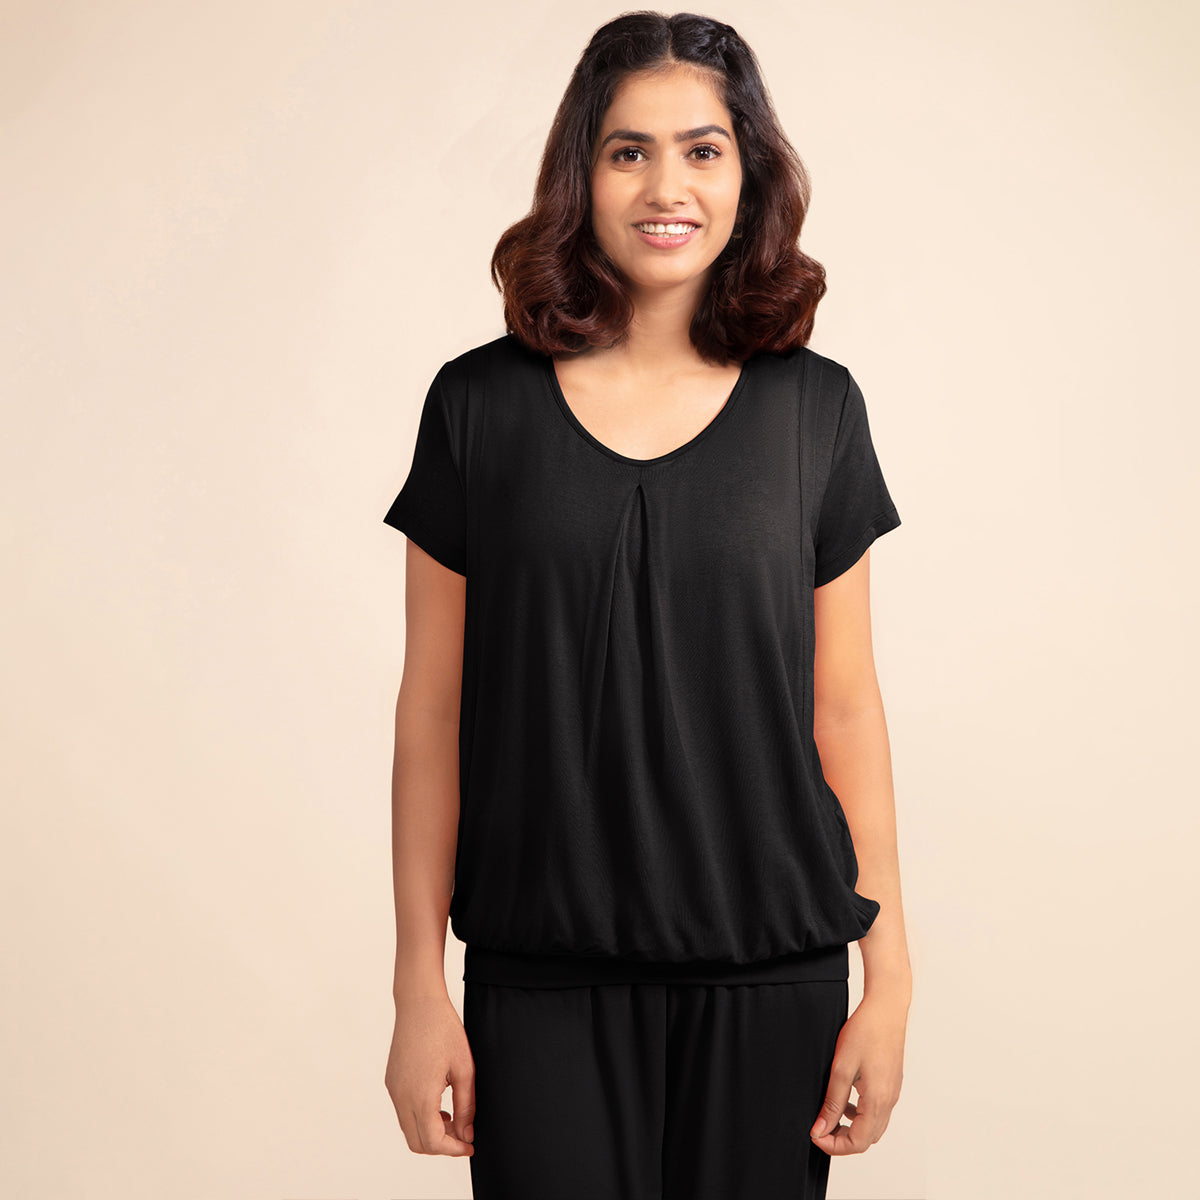 Comfy Mommy Top - Black NYS043